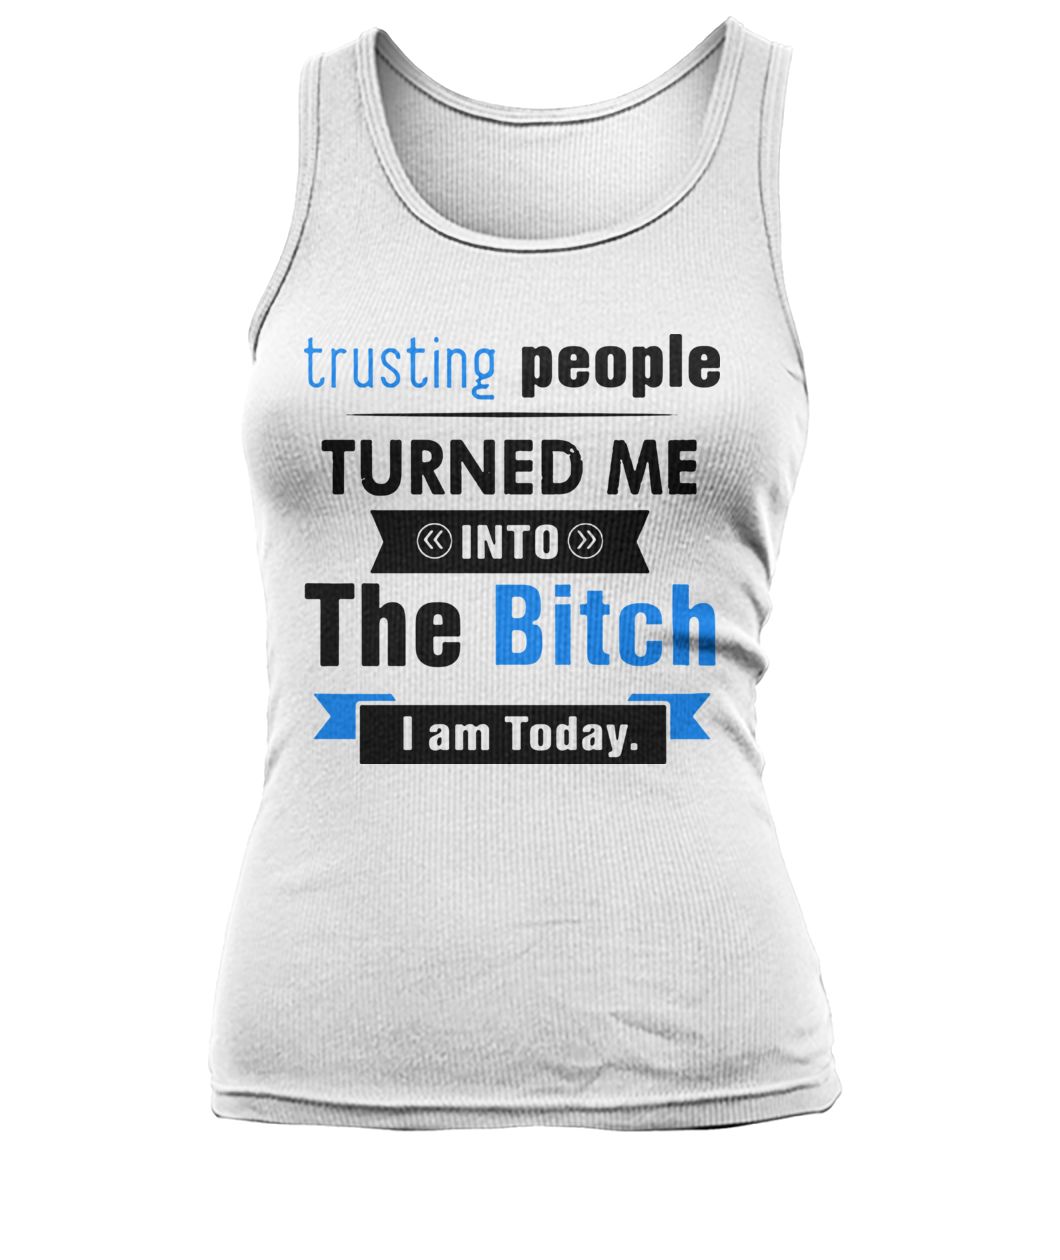 Trusting people turned me into the bitch I am today women's tank top